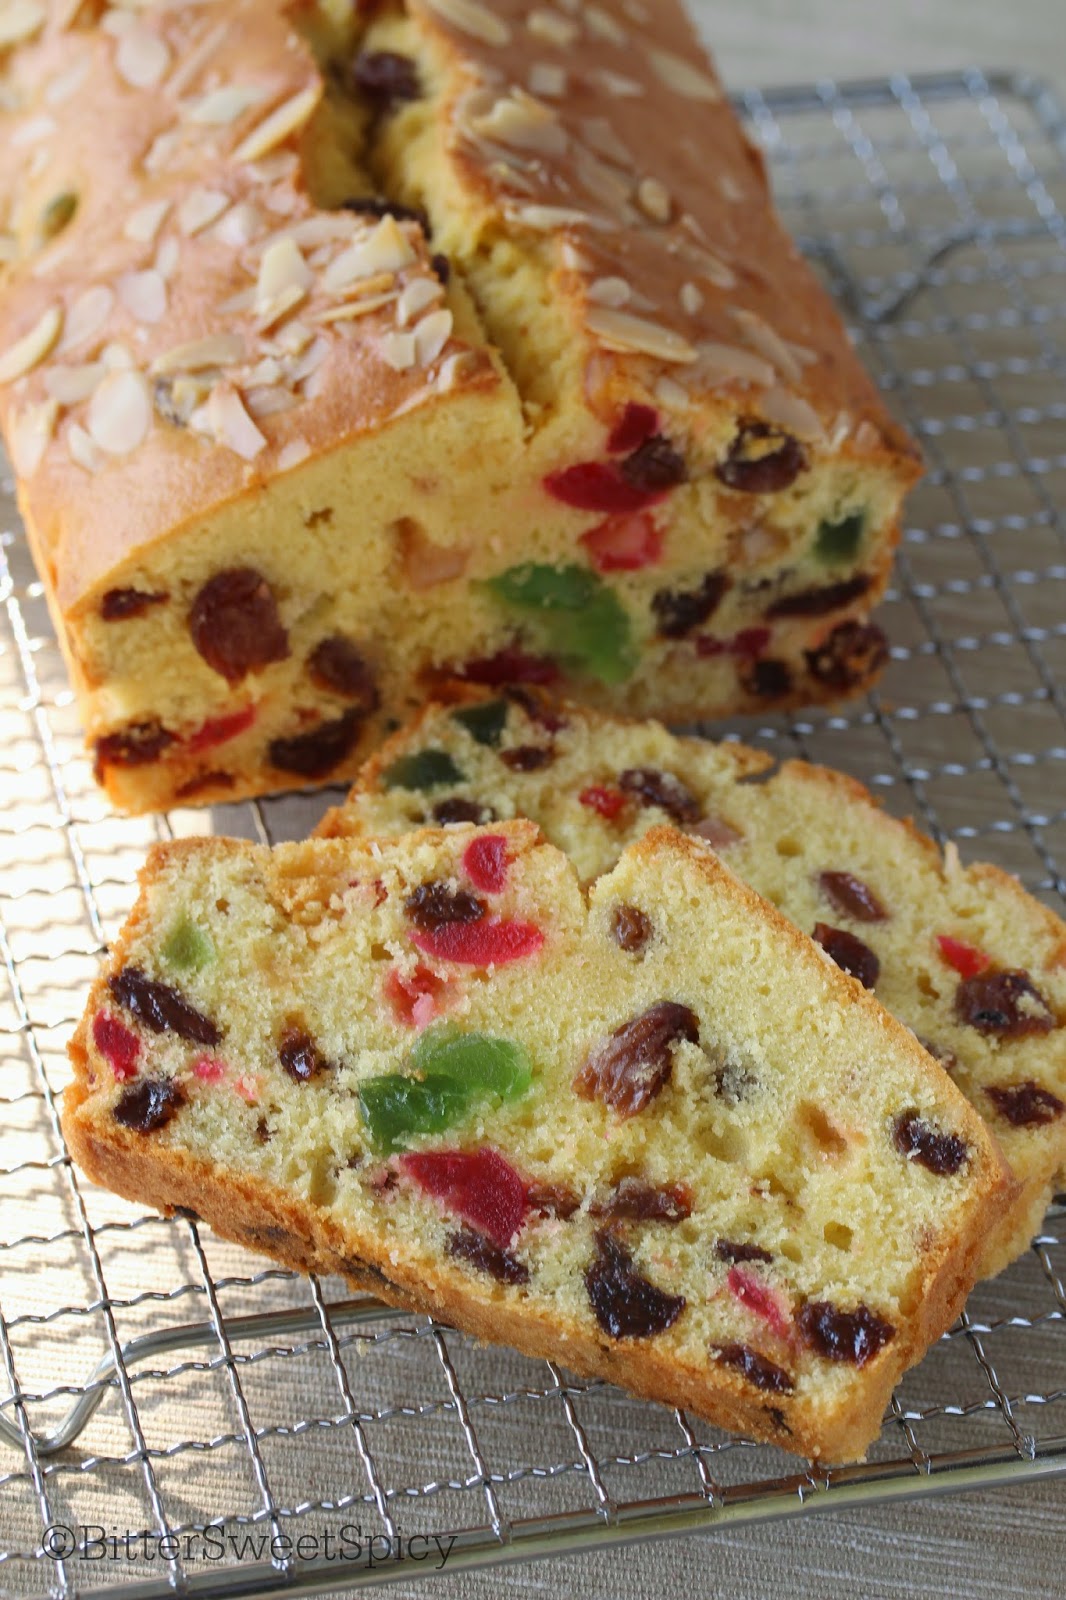 BitterSweetSpicy: Light Fruit Cake